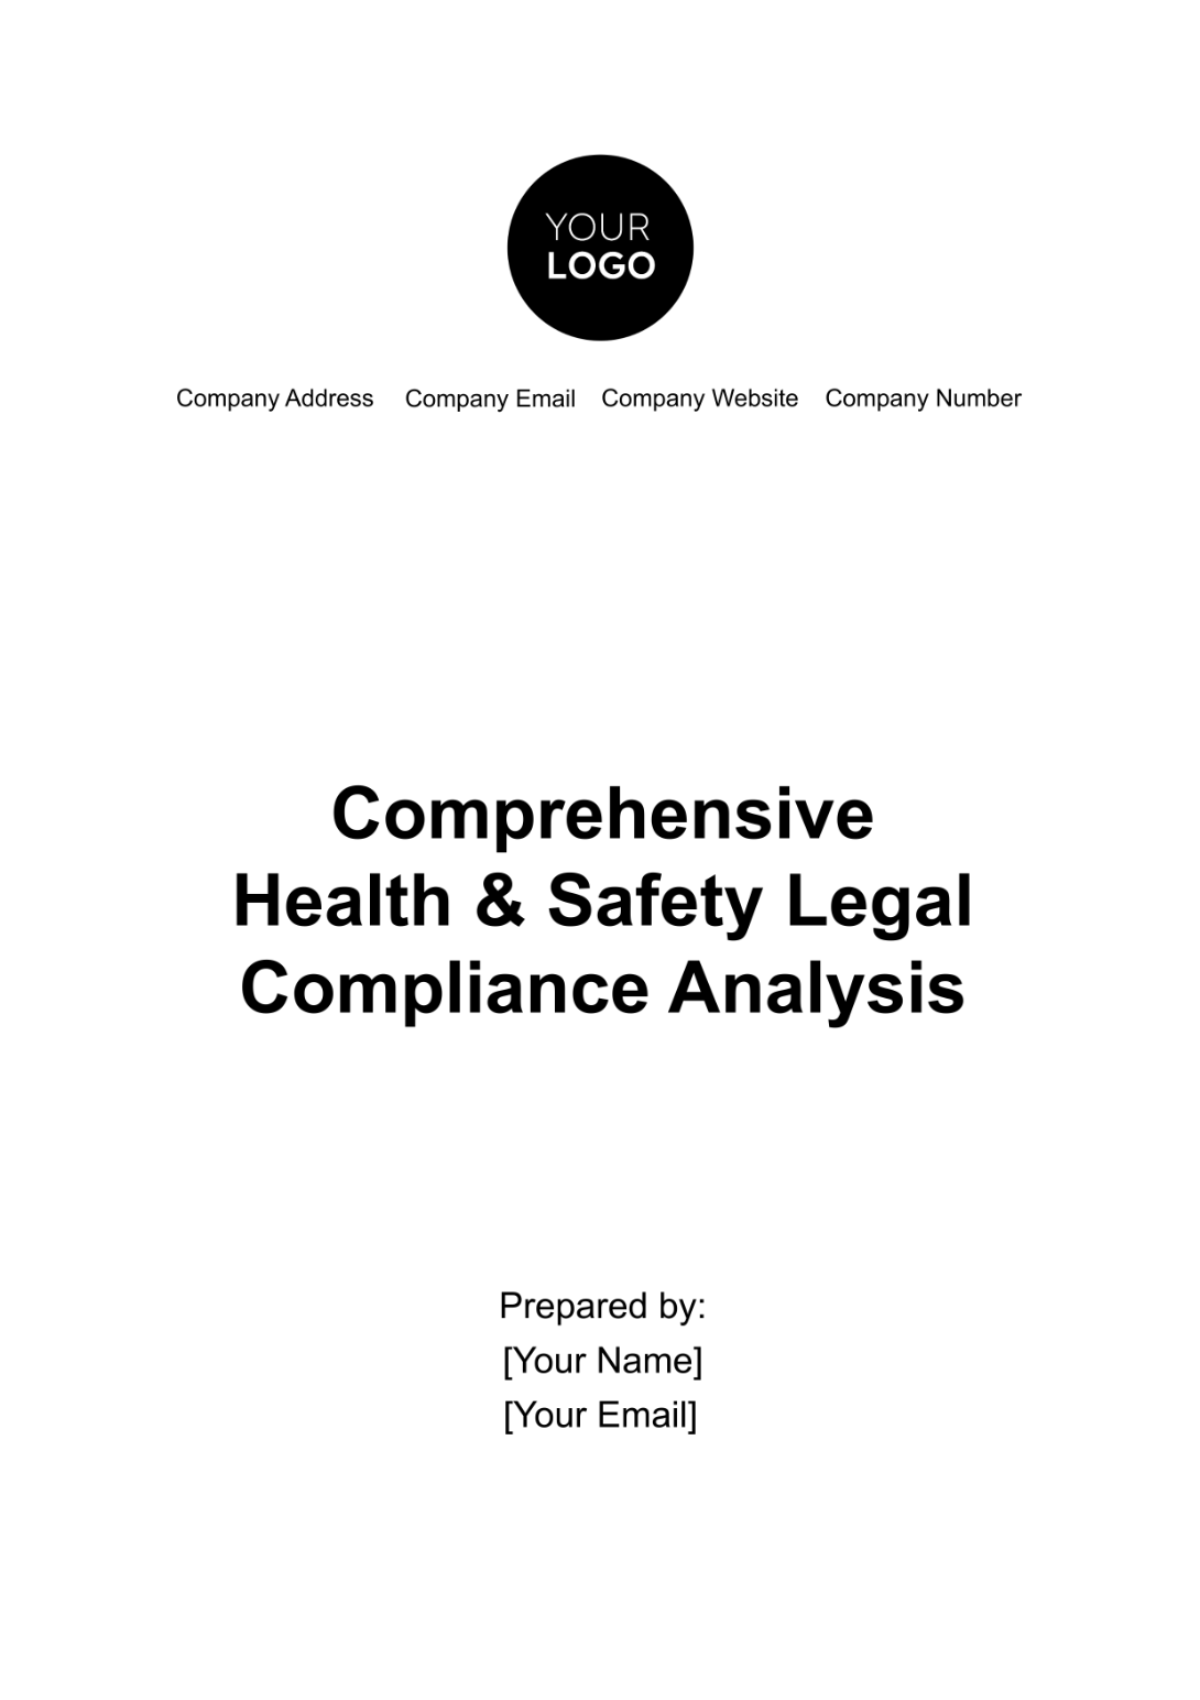 Comprehensive Health & Safety Legal Compliance Analysis Template